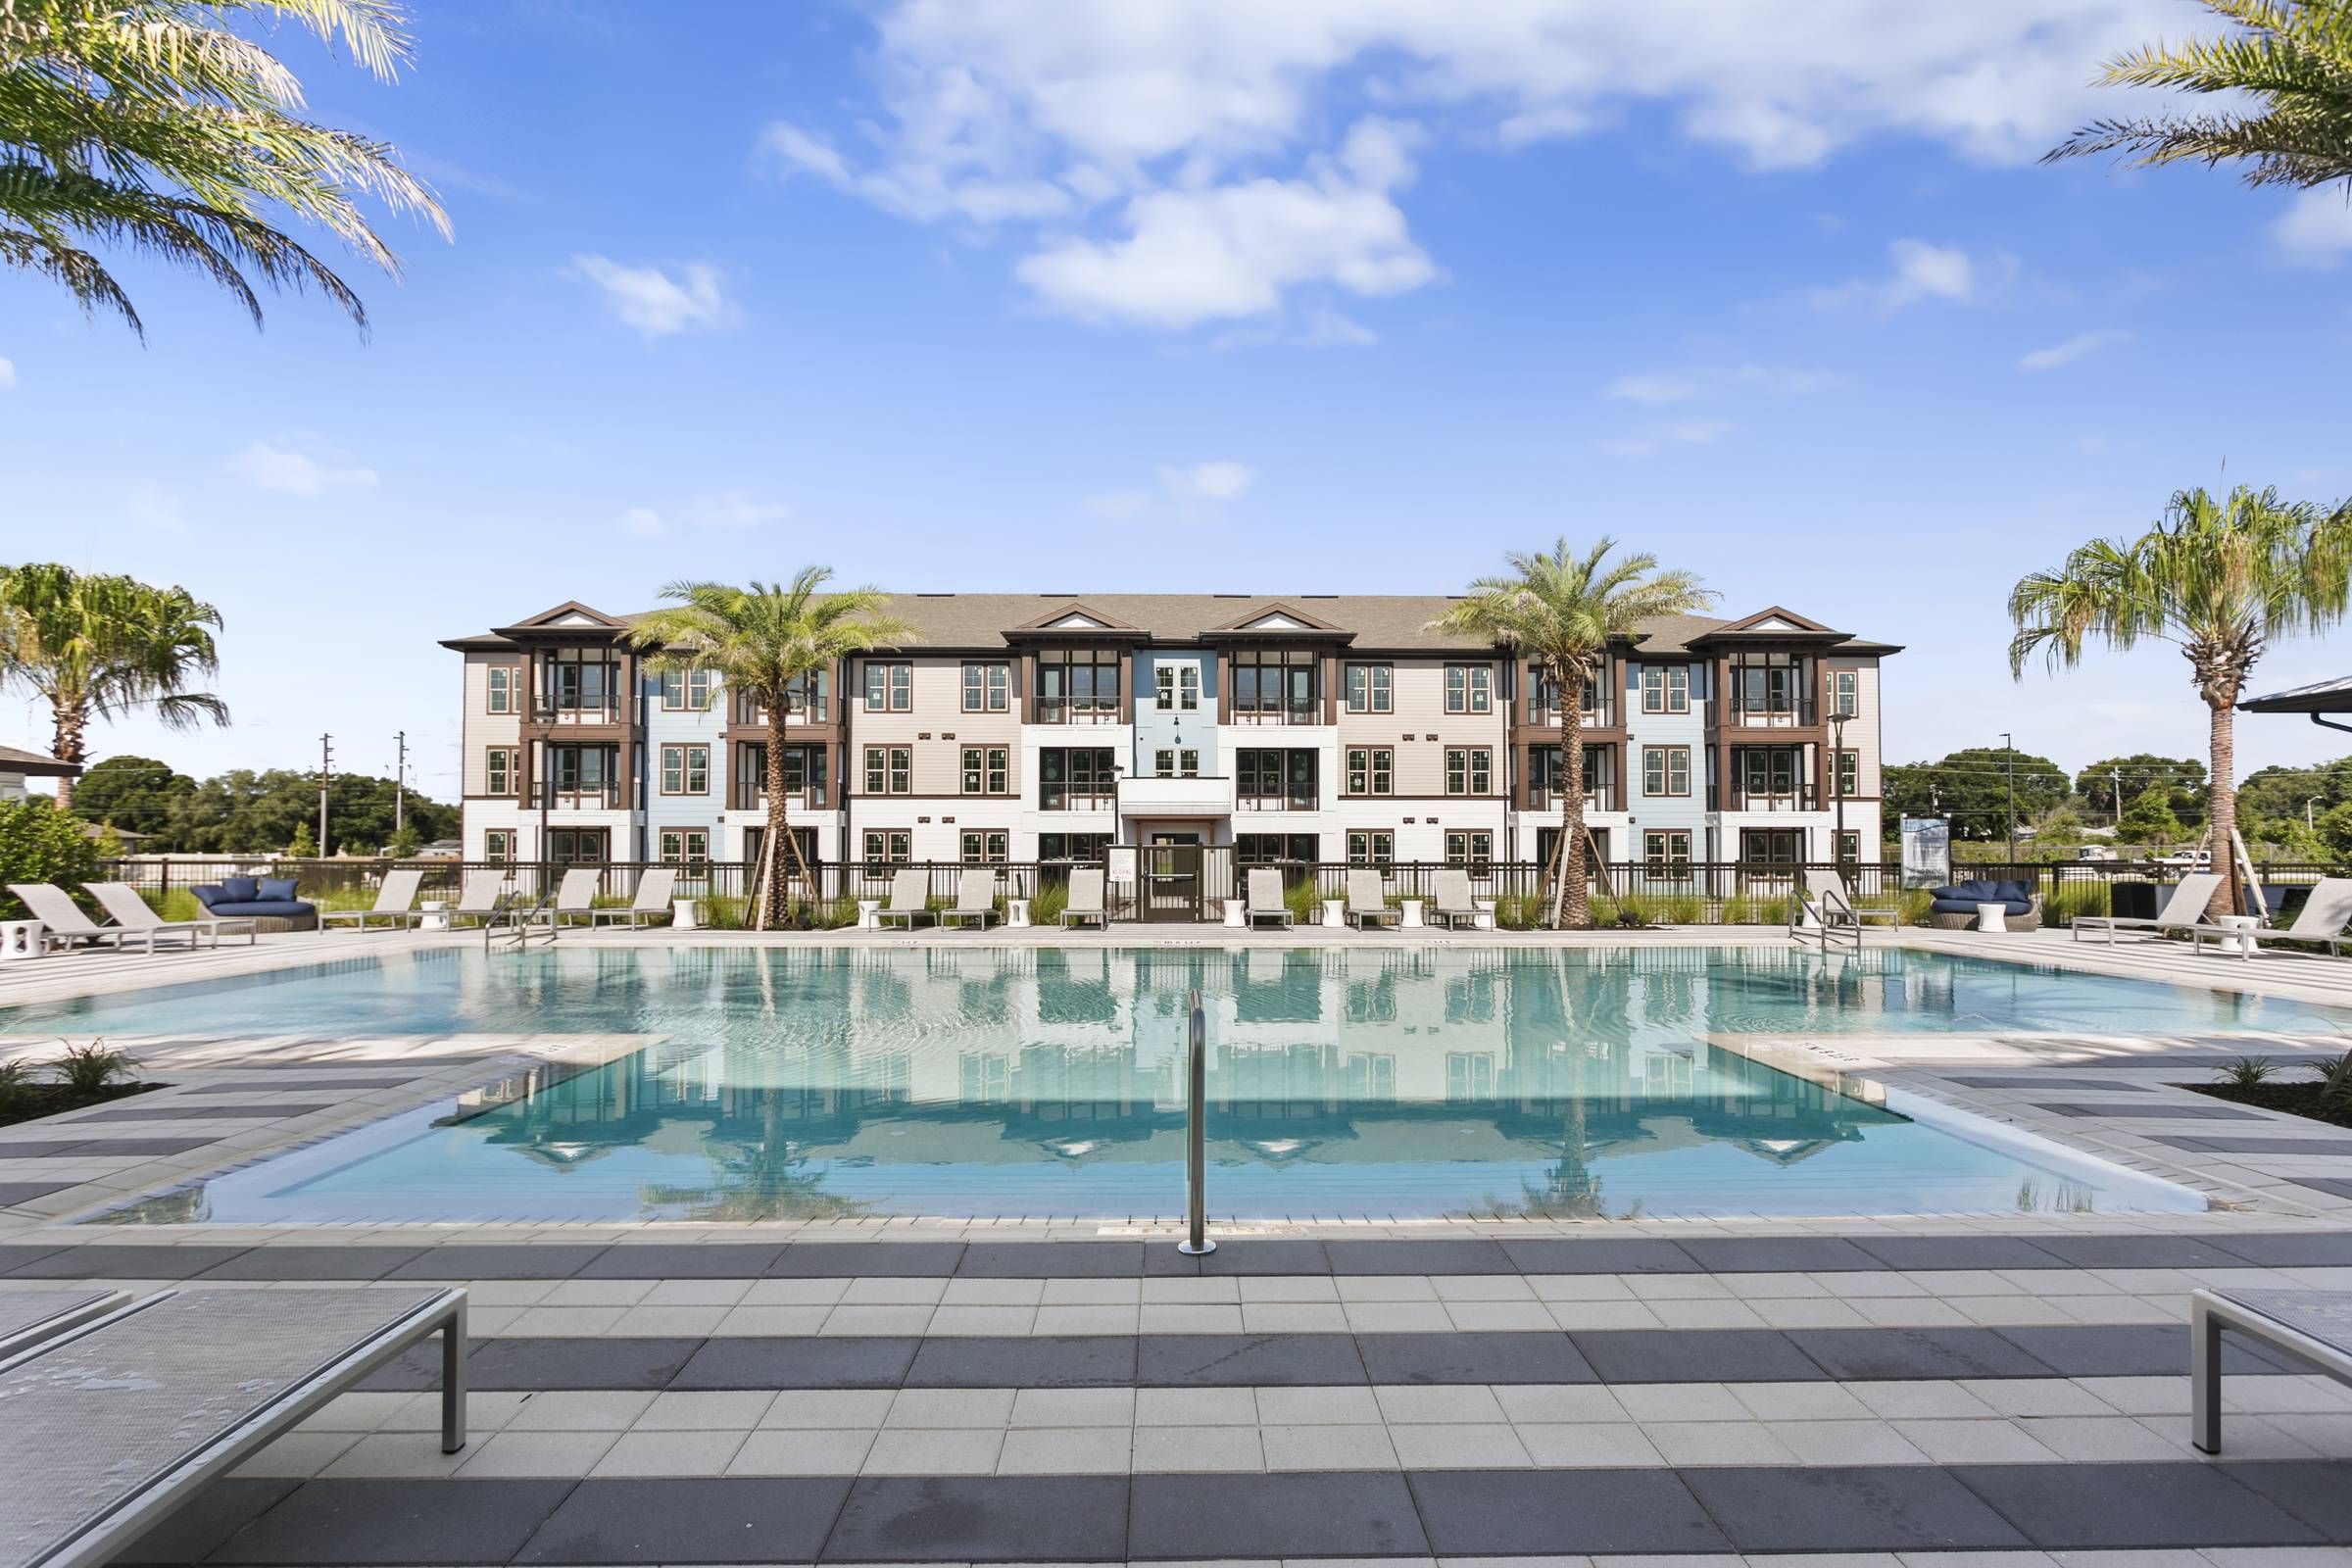 Alta Clearwater's serene poolside view showcases lounging chairs facing a large, reflective swimming pool, flanked by a stately three-story building with palm trees.